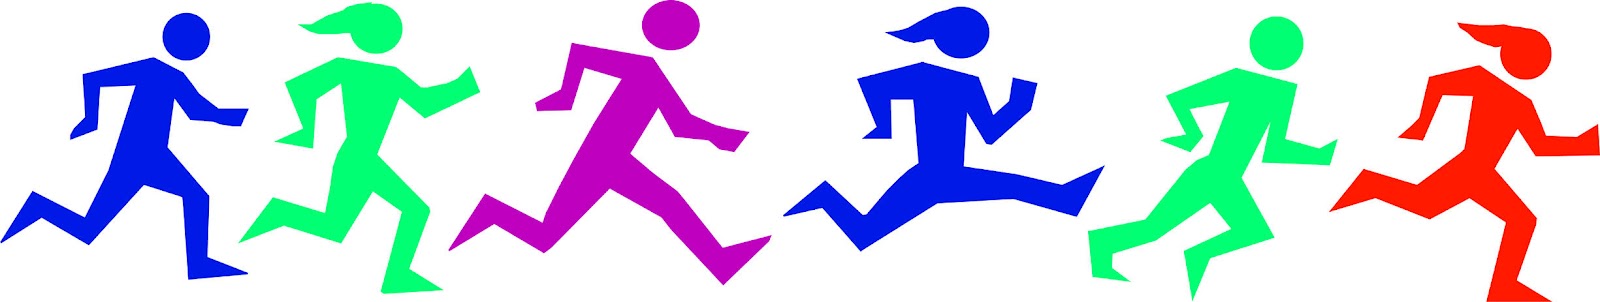 Track And Field Clipart.